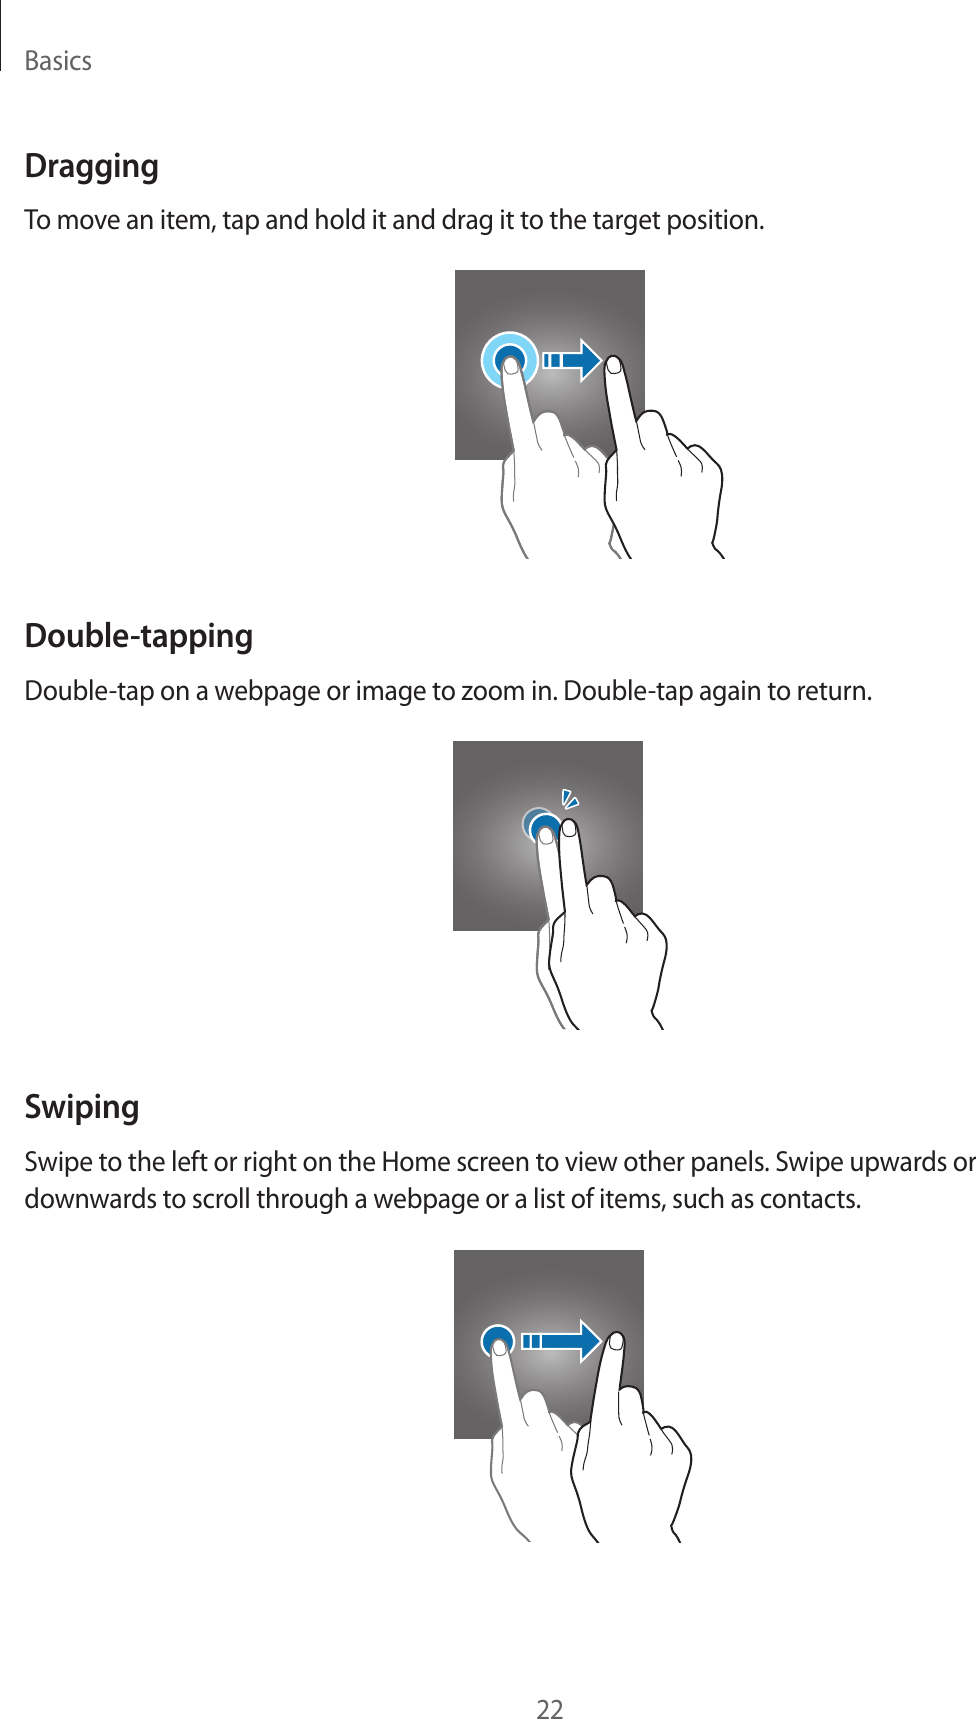 Basics22DraggingTo move an item, tap and hold it and drag it to the target position.Double-tappingDouble-tap on a webpage or image to zoom in. Double-tap again to return.SwipingSwipe to the left or right on the Home screen to view other panels. Swipe upwards or downwards to scroll through a webpage or a list of items, such as contacts.